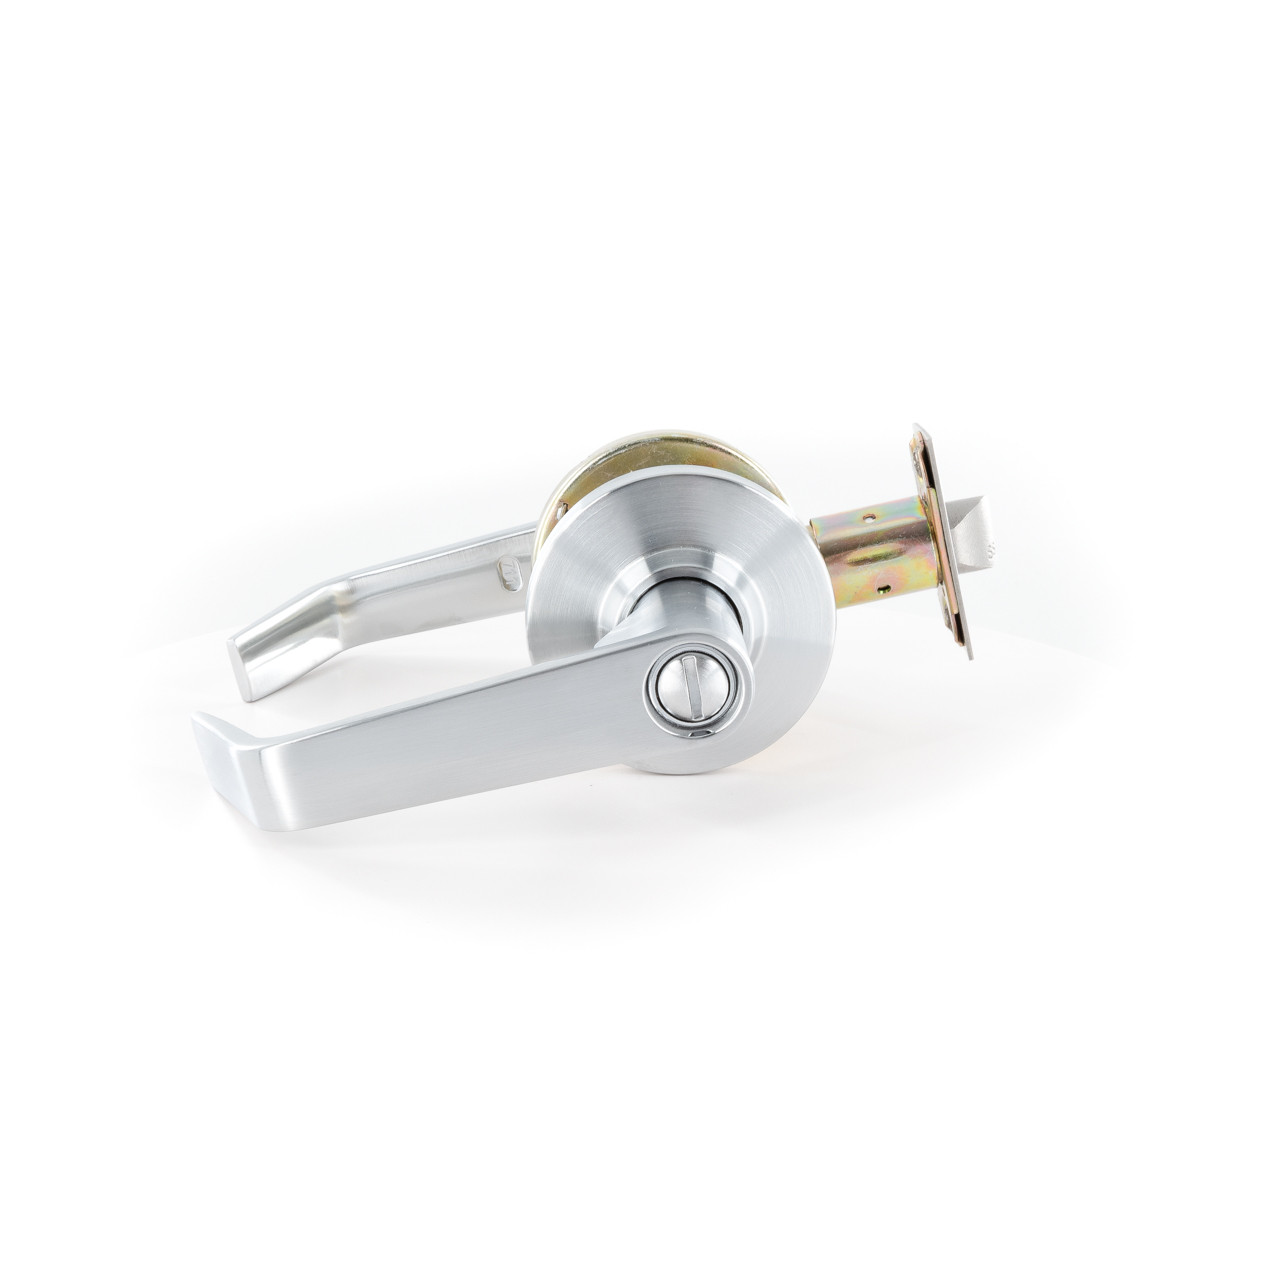 The image features a Design Hardware X-82-F US26D Entry Flat Lever Lock, showcasing a sophisticated and modern design. The lock is designed for entry applications and is equipped with a 2-3/4" backset, ensuring proper alignment with the door frame. The flat lever, serving as the primary handle, exudes a sleek and contemporary aesthetic. The lock's finish is US26D, denoting a satin chrome finish, adding a polished and refined touch to the overall appearance. Additionally, the lock comes with a KA-5 ASA Strike, emphasizing its compatibility with standard American Locksmith Association (ASA) strike preparations. The image captures the functionality and elegance of this entry flat lever lock, suitable for various residential or commercial settings.